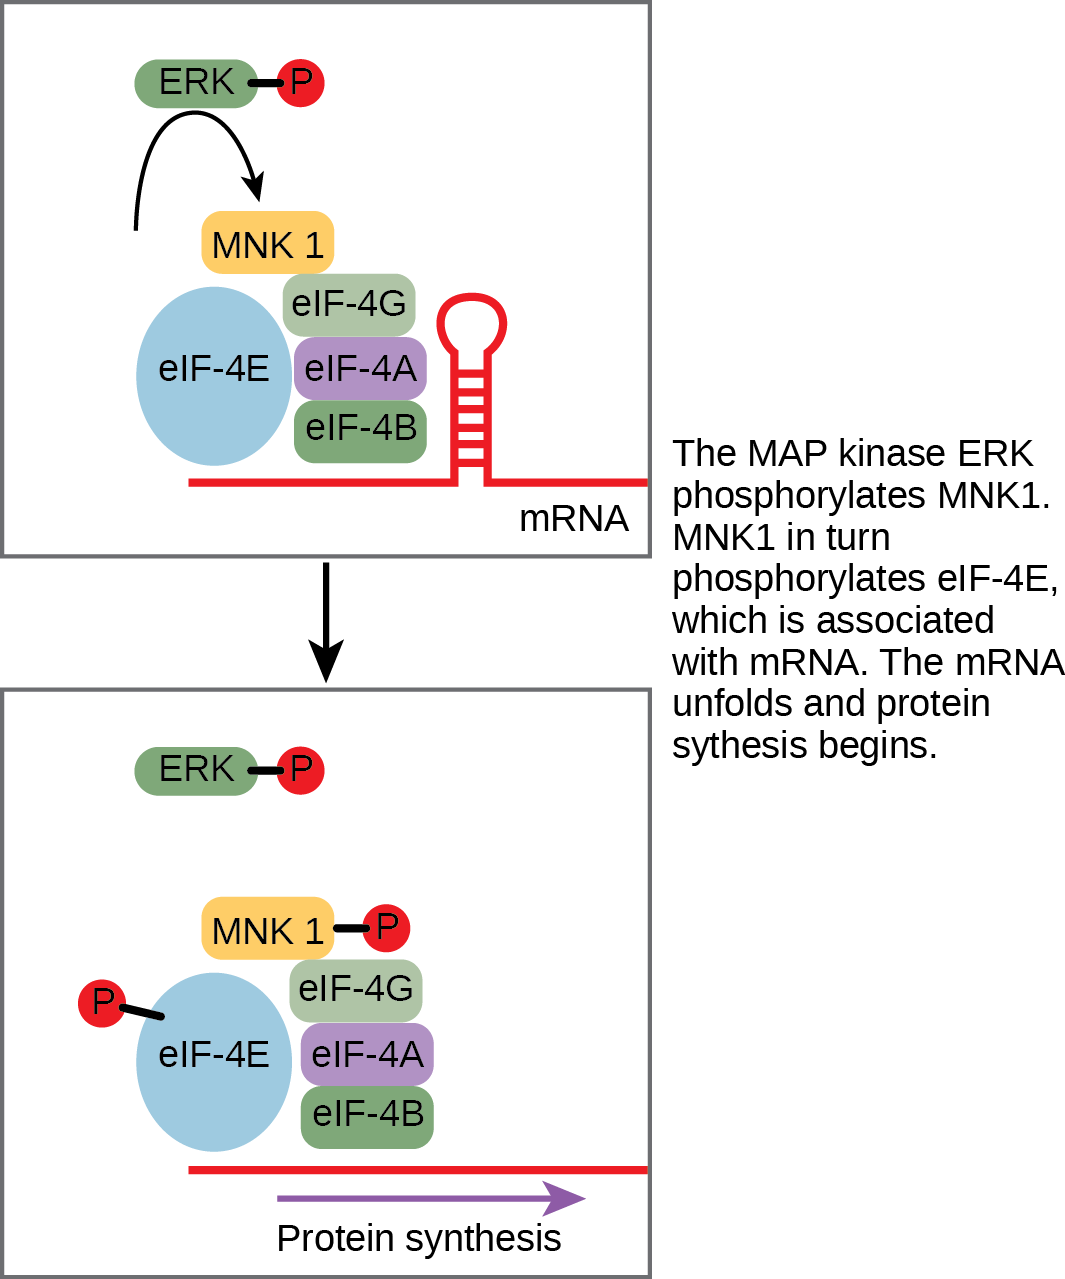 This illustration shows the pathway by which ERK, a MAP kinase, activates protein synthesis. Phosphorylated ERK phosphorylates MNK1, which in turn phosphorylates eIF-4E, which is associated with mRNA. When eIF-4E is phosphorylated, the mRNA unfolds and protein synthesis begins.